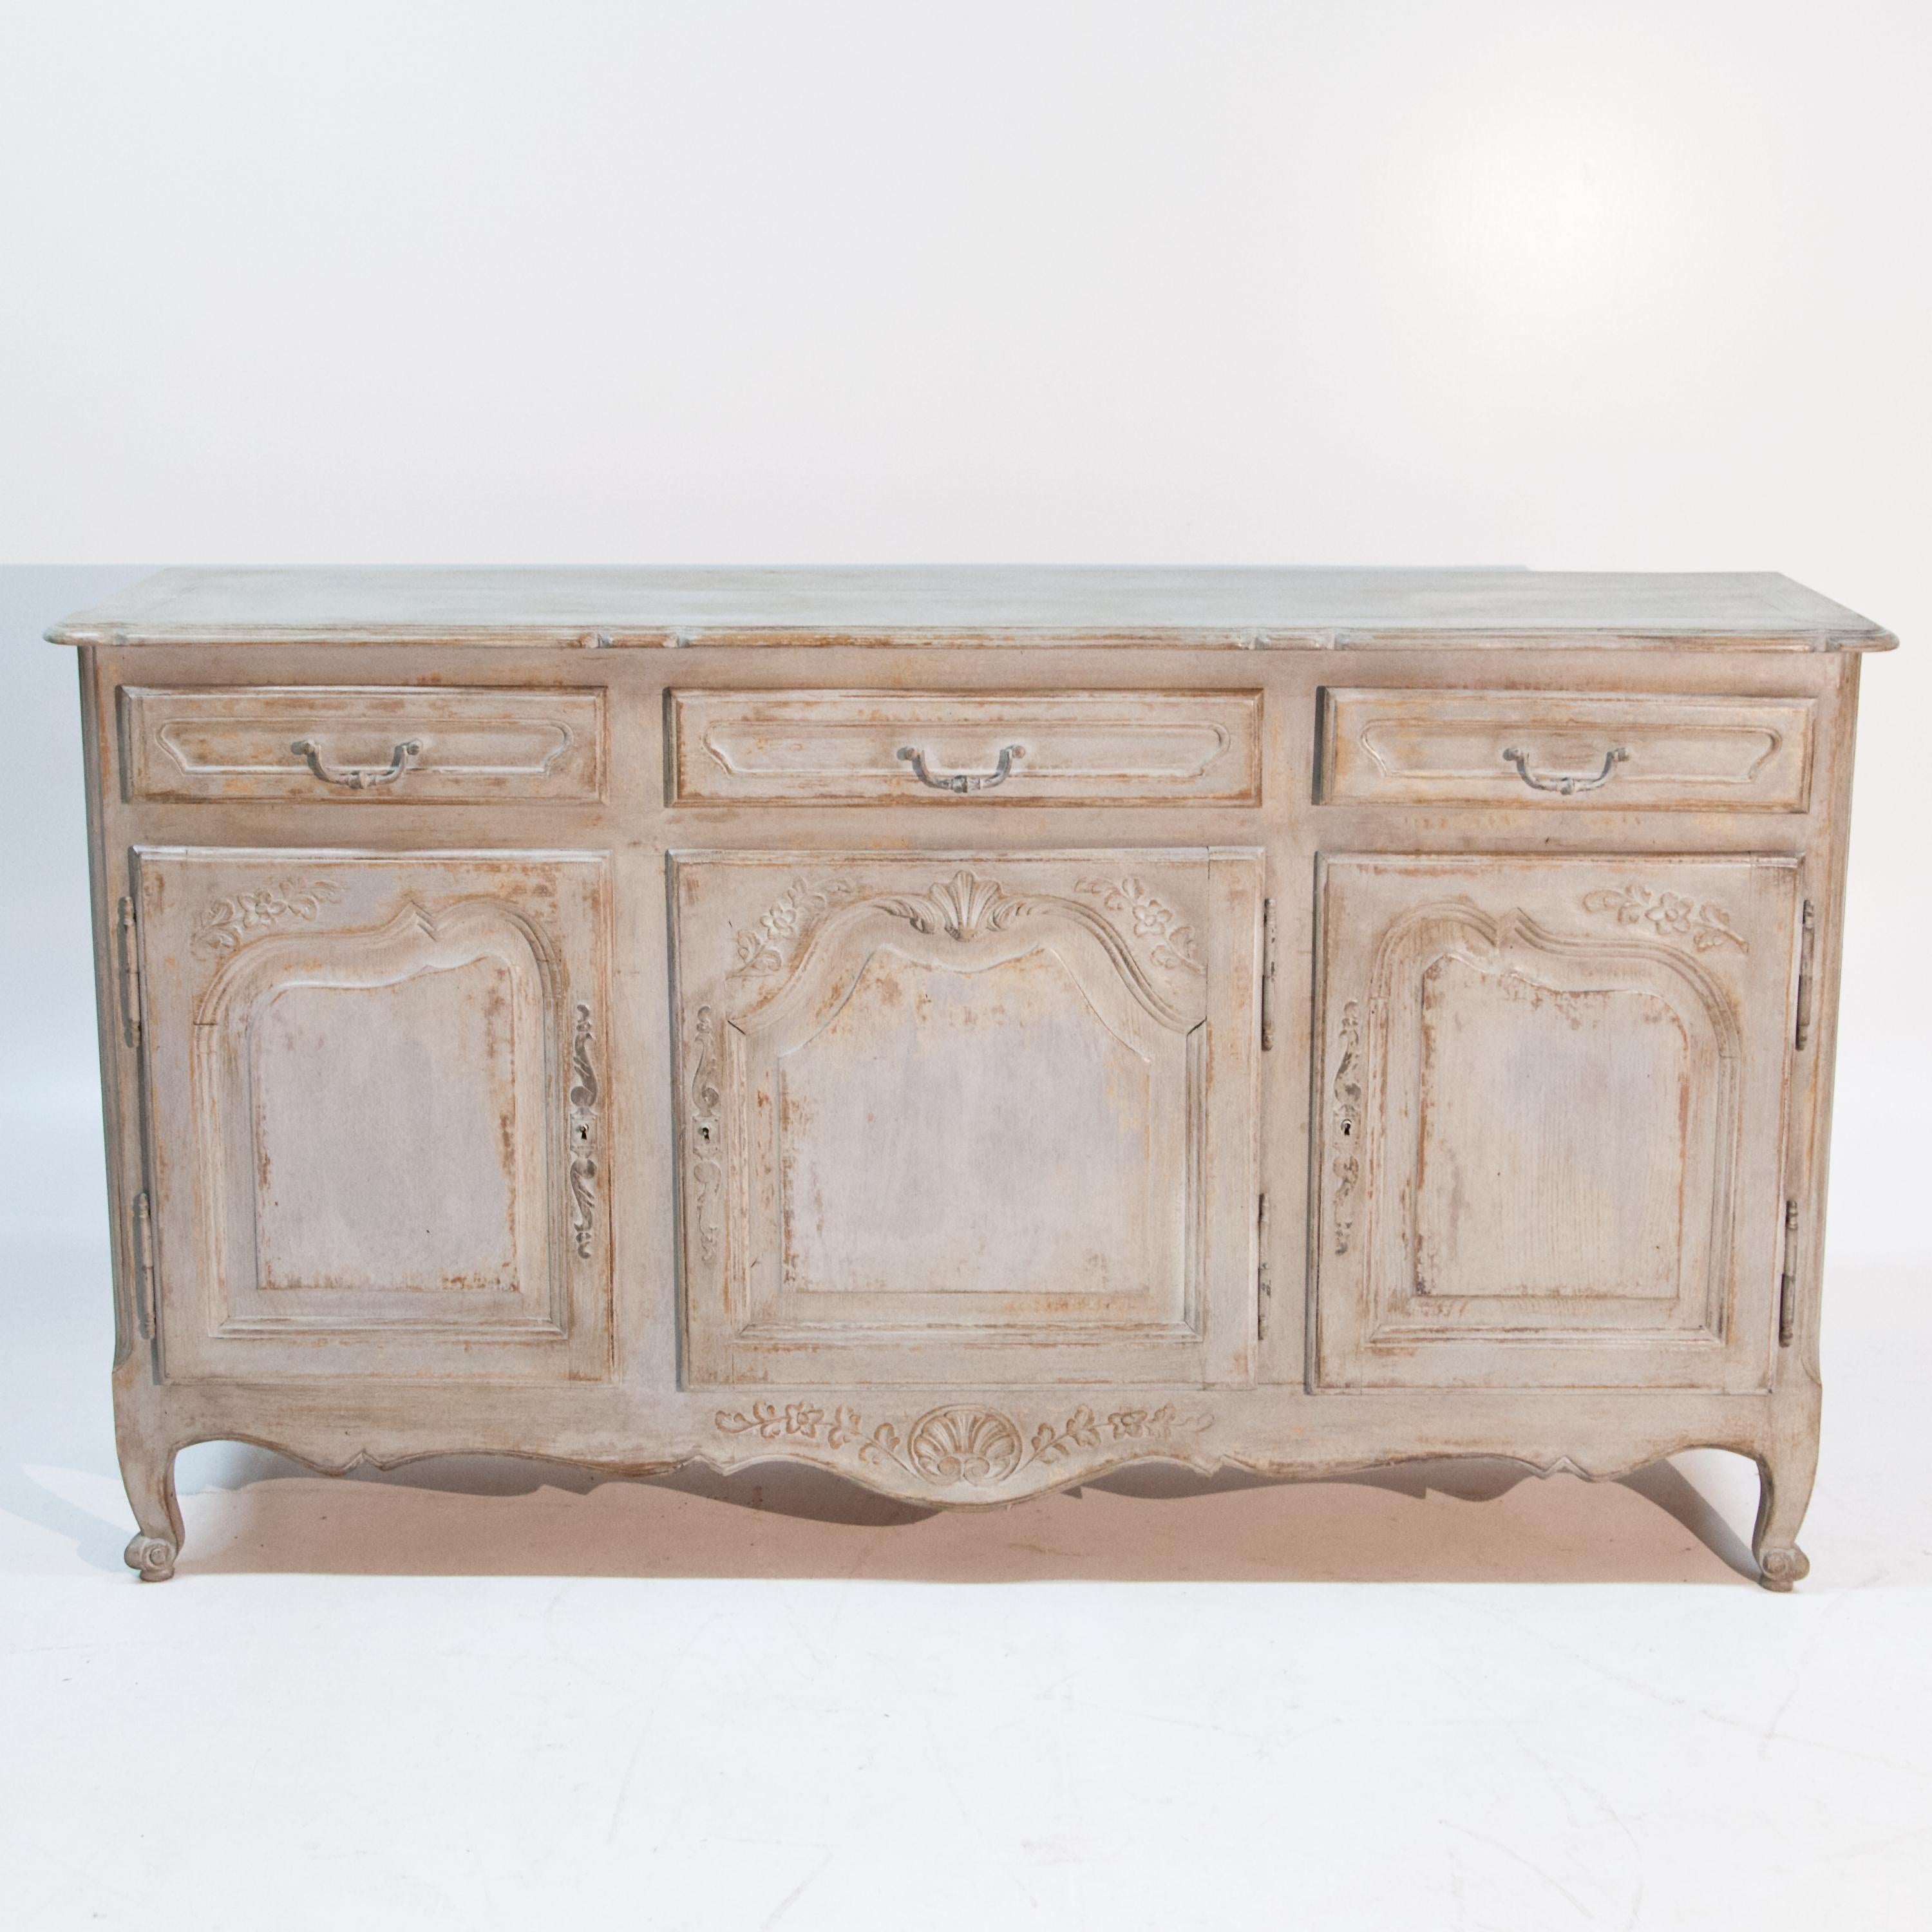 Three-door credenza with three drawers and curved frame, standing on volute feet. The fronts with wavy panels and vine decoration. The grey-beige setting is new and has been decoratively rubbed through.